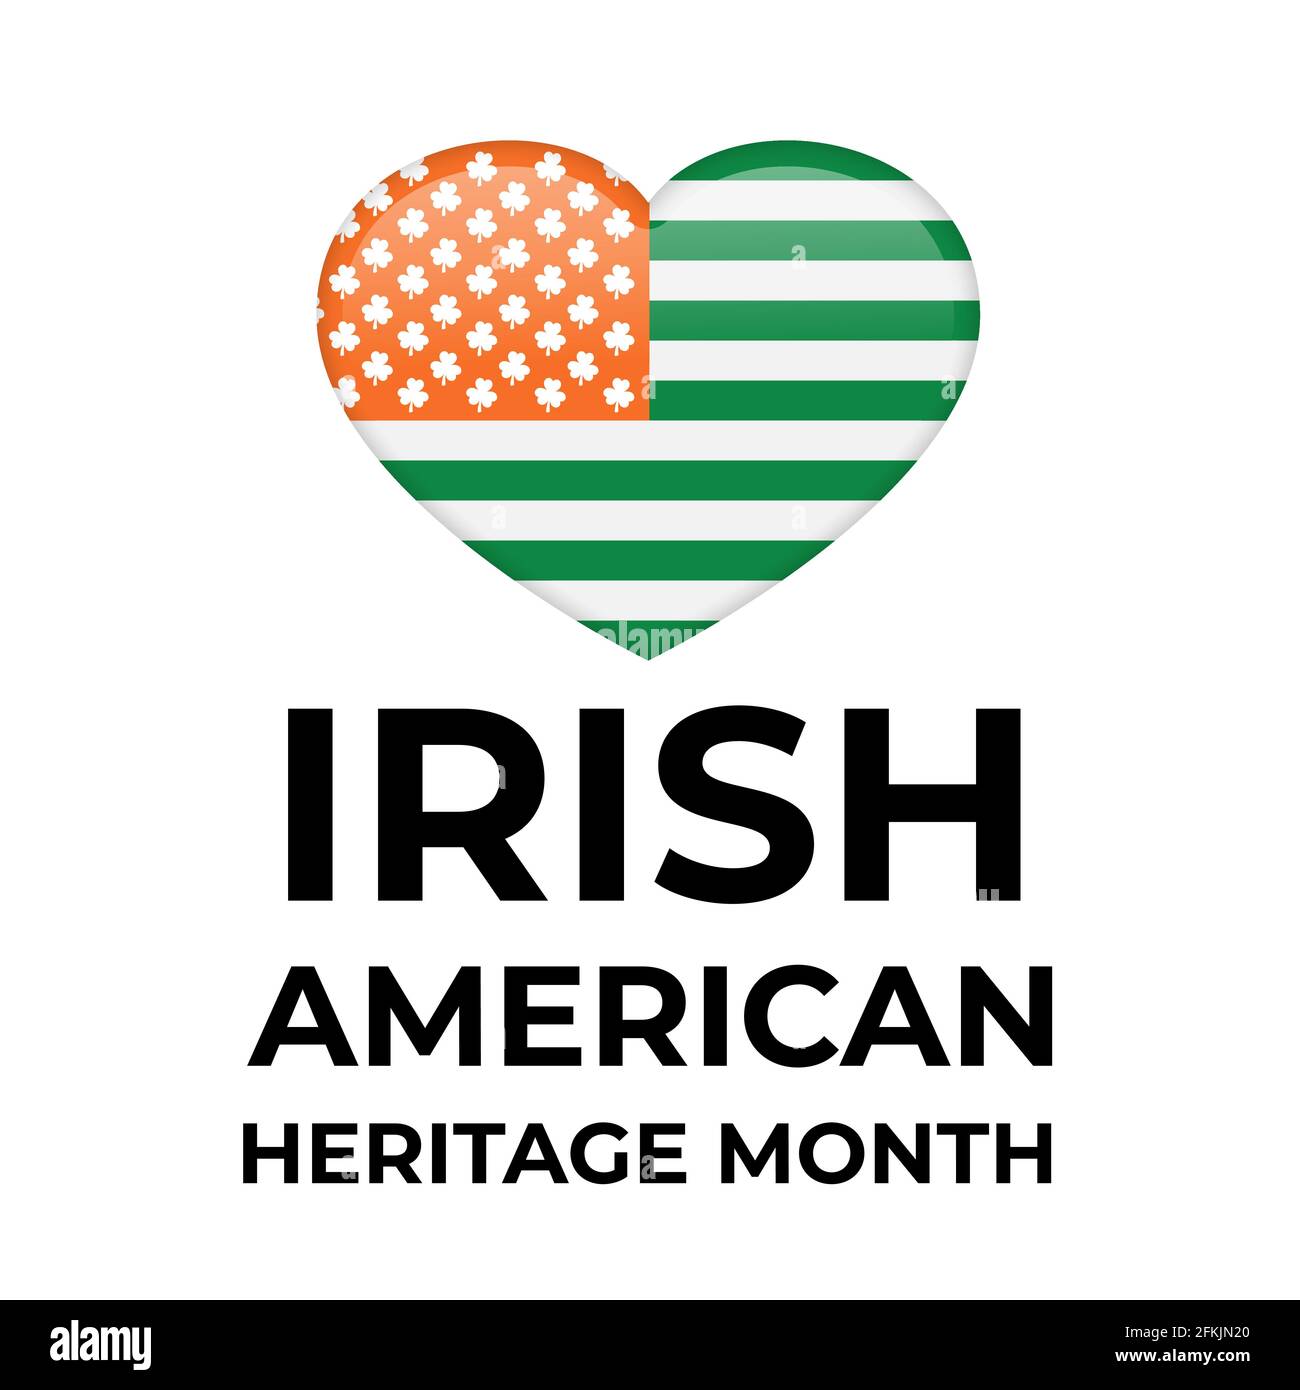 Irish-American Heritage Month typography poster. Annual event in United States celebrated in March. Vector template for banner, sticker, flyer, etc. Stock Vector